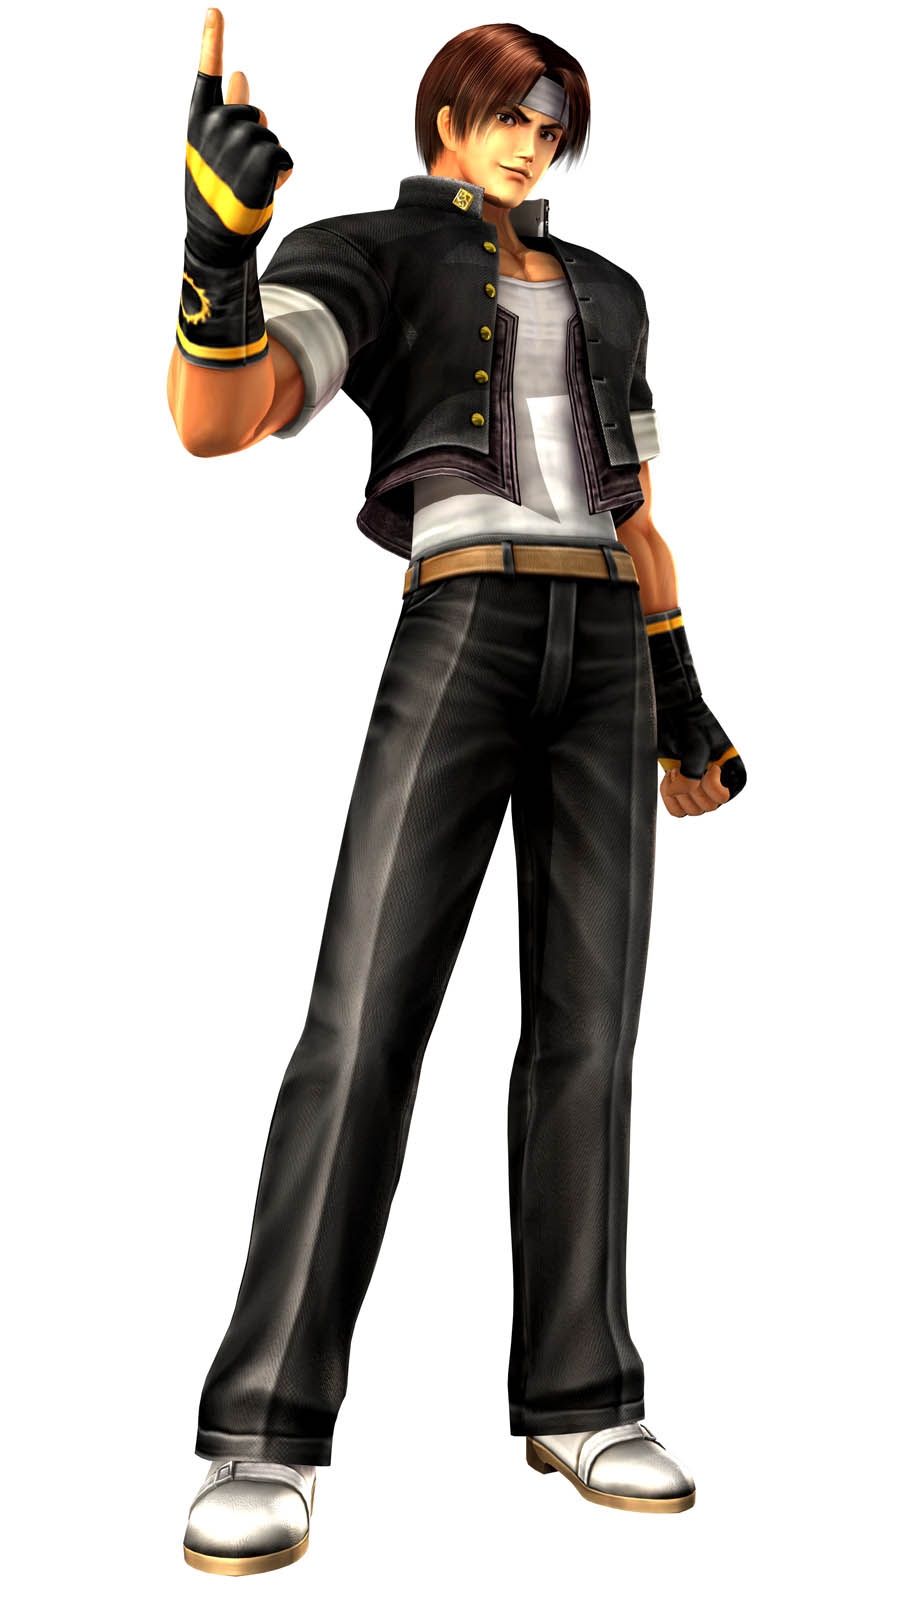 Iori Yagami/Quotes, The King of Fighters Wiki